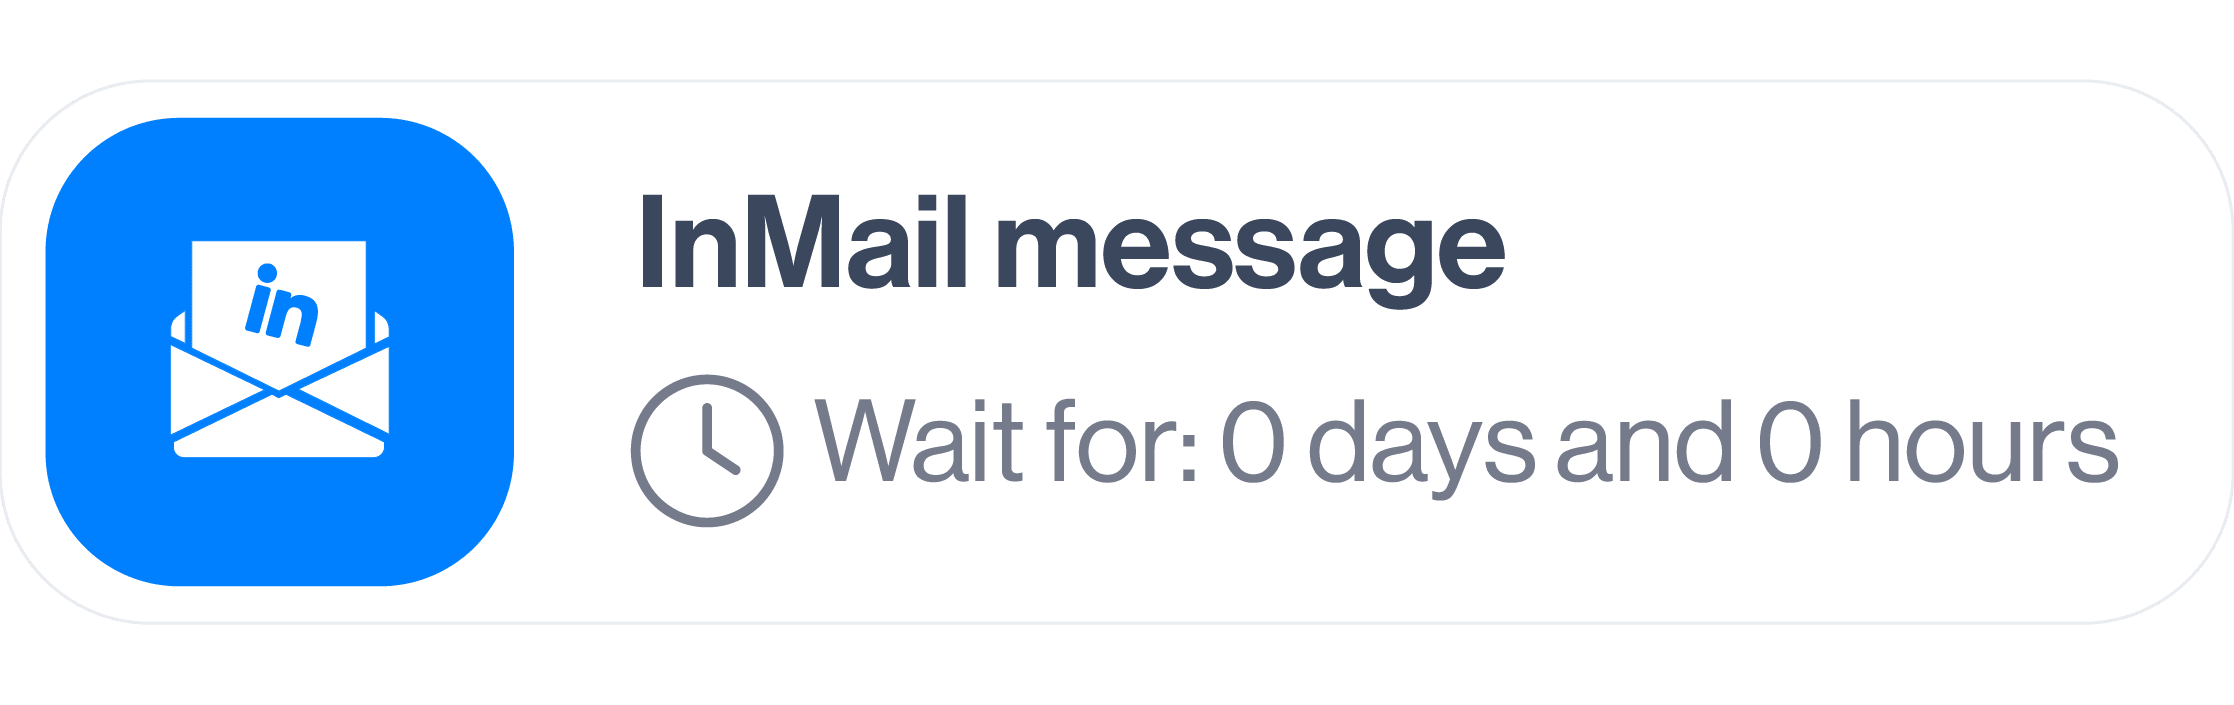 Image of InMail message step